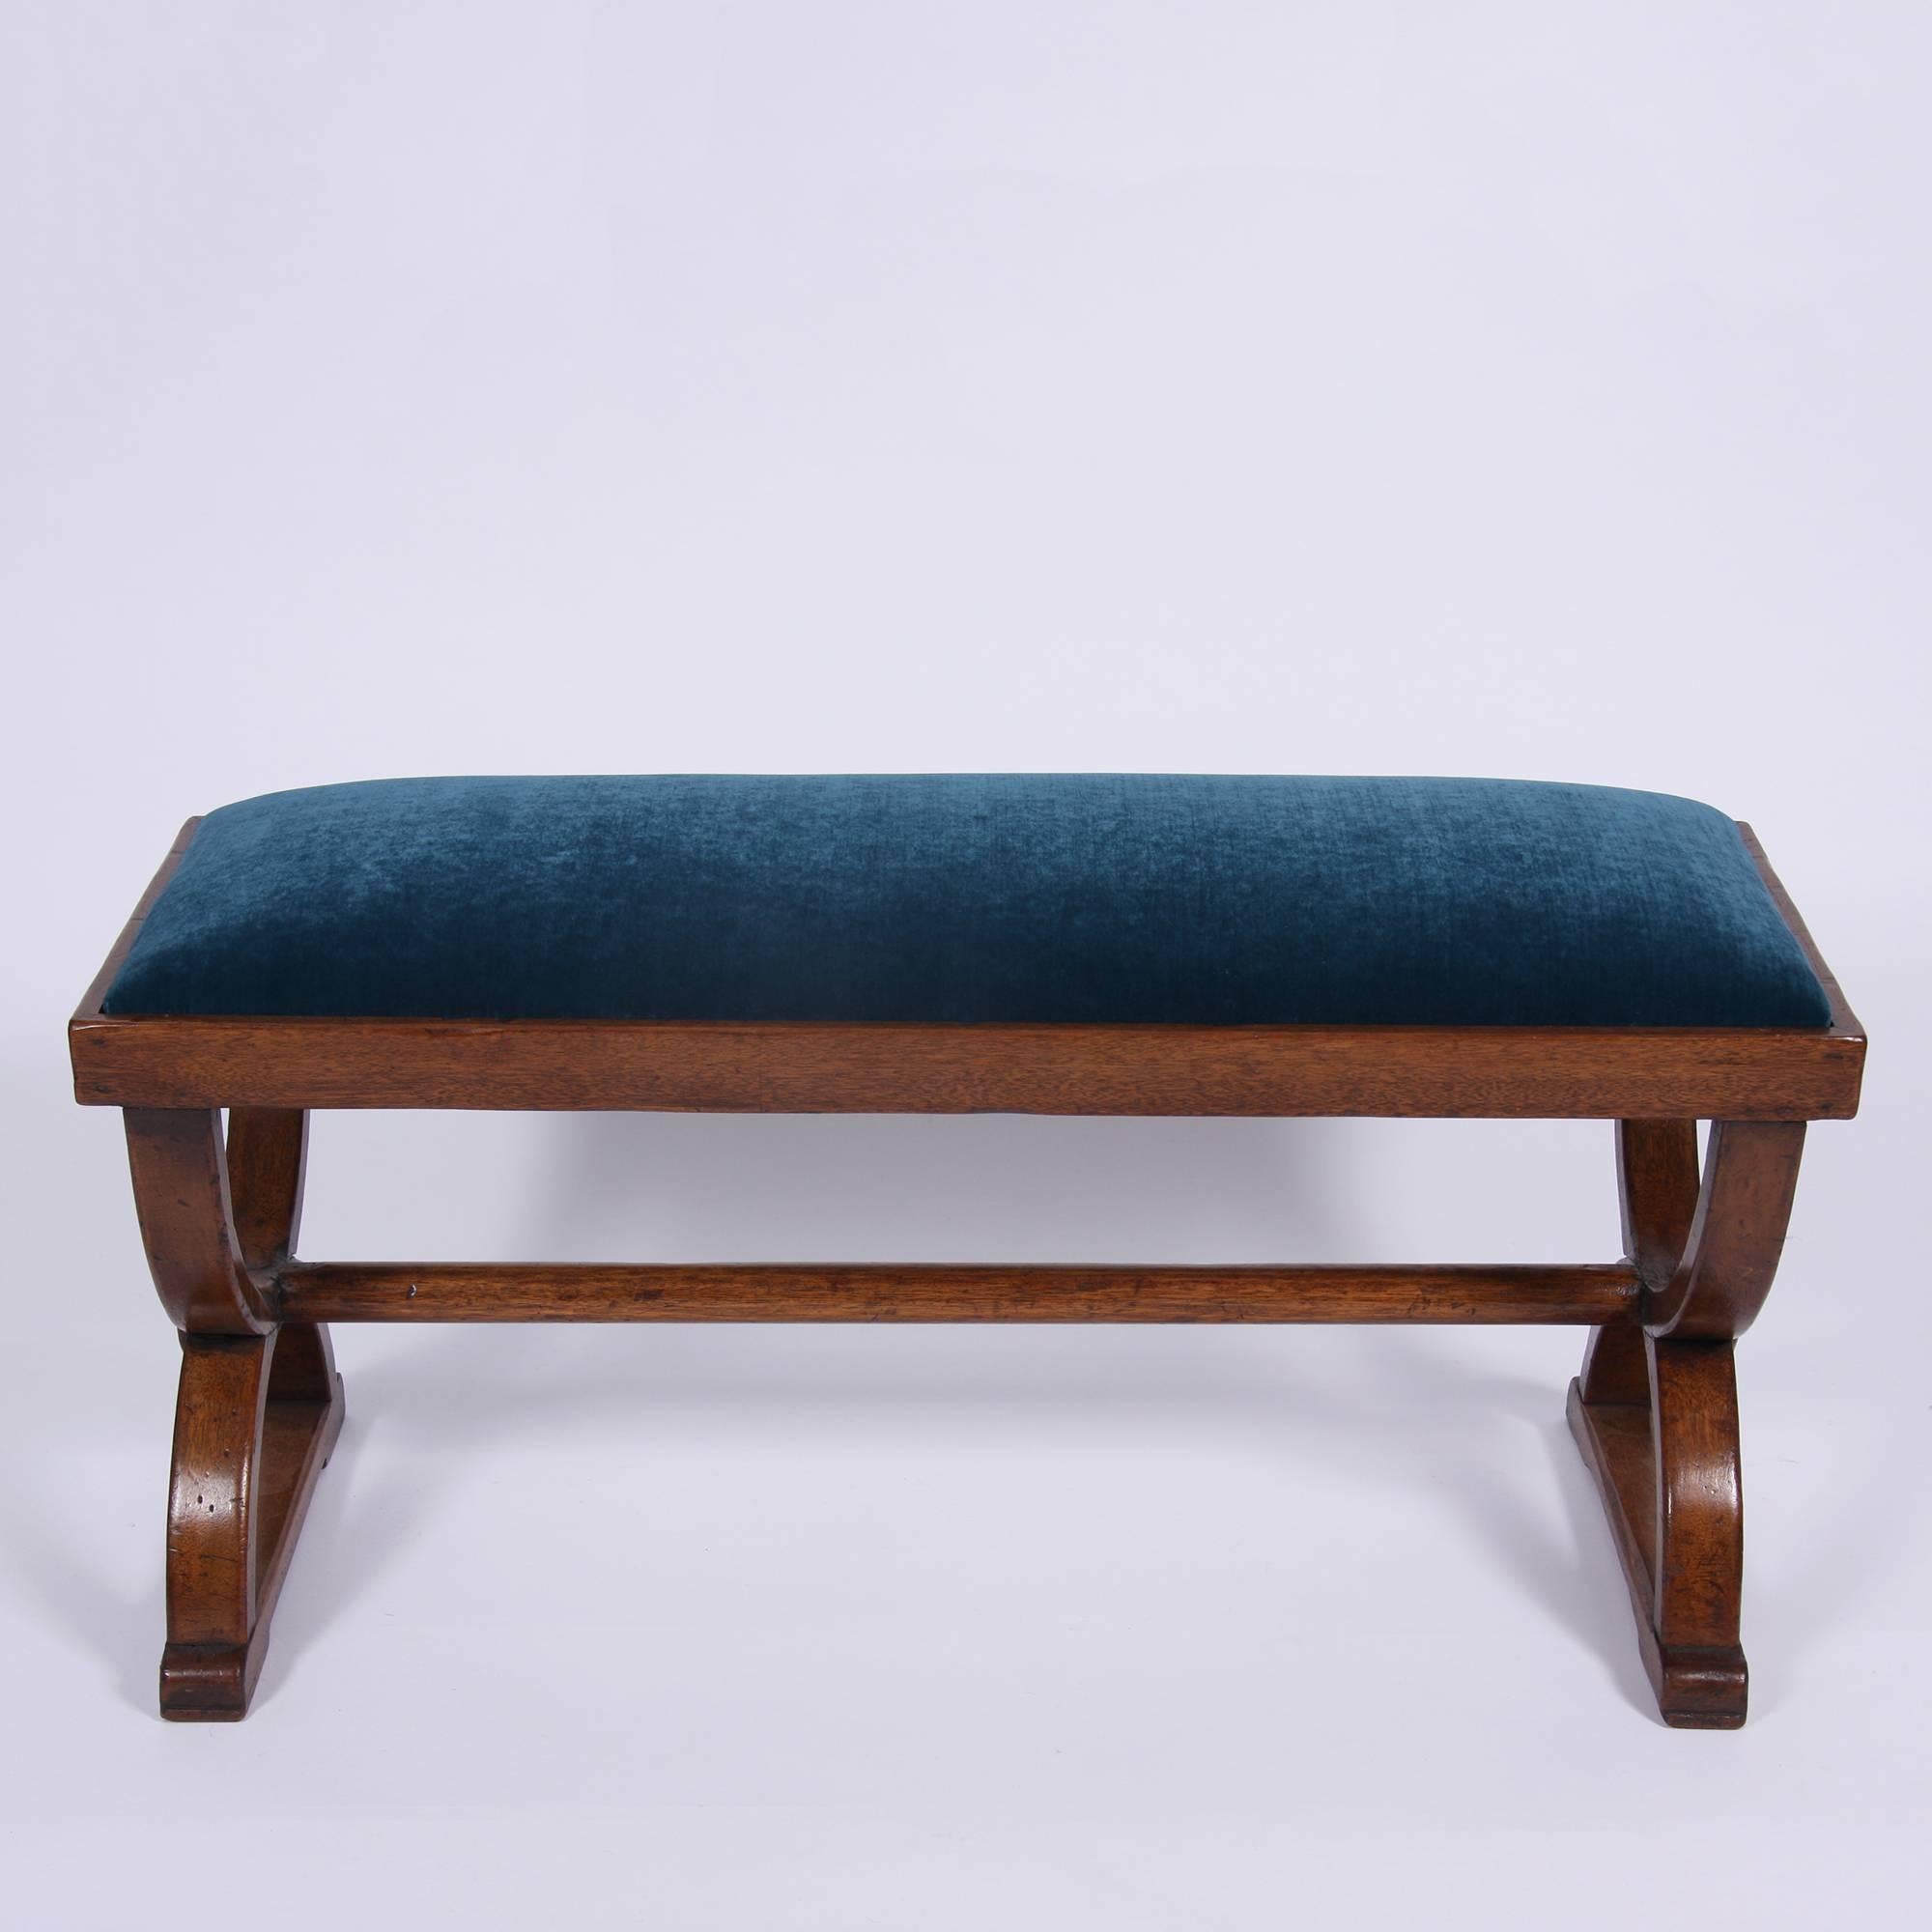 Beautiful oak stool, re-upholstered in luxurious teal velvet. Perfect for an entrance hall, or at the end of a bed.